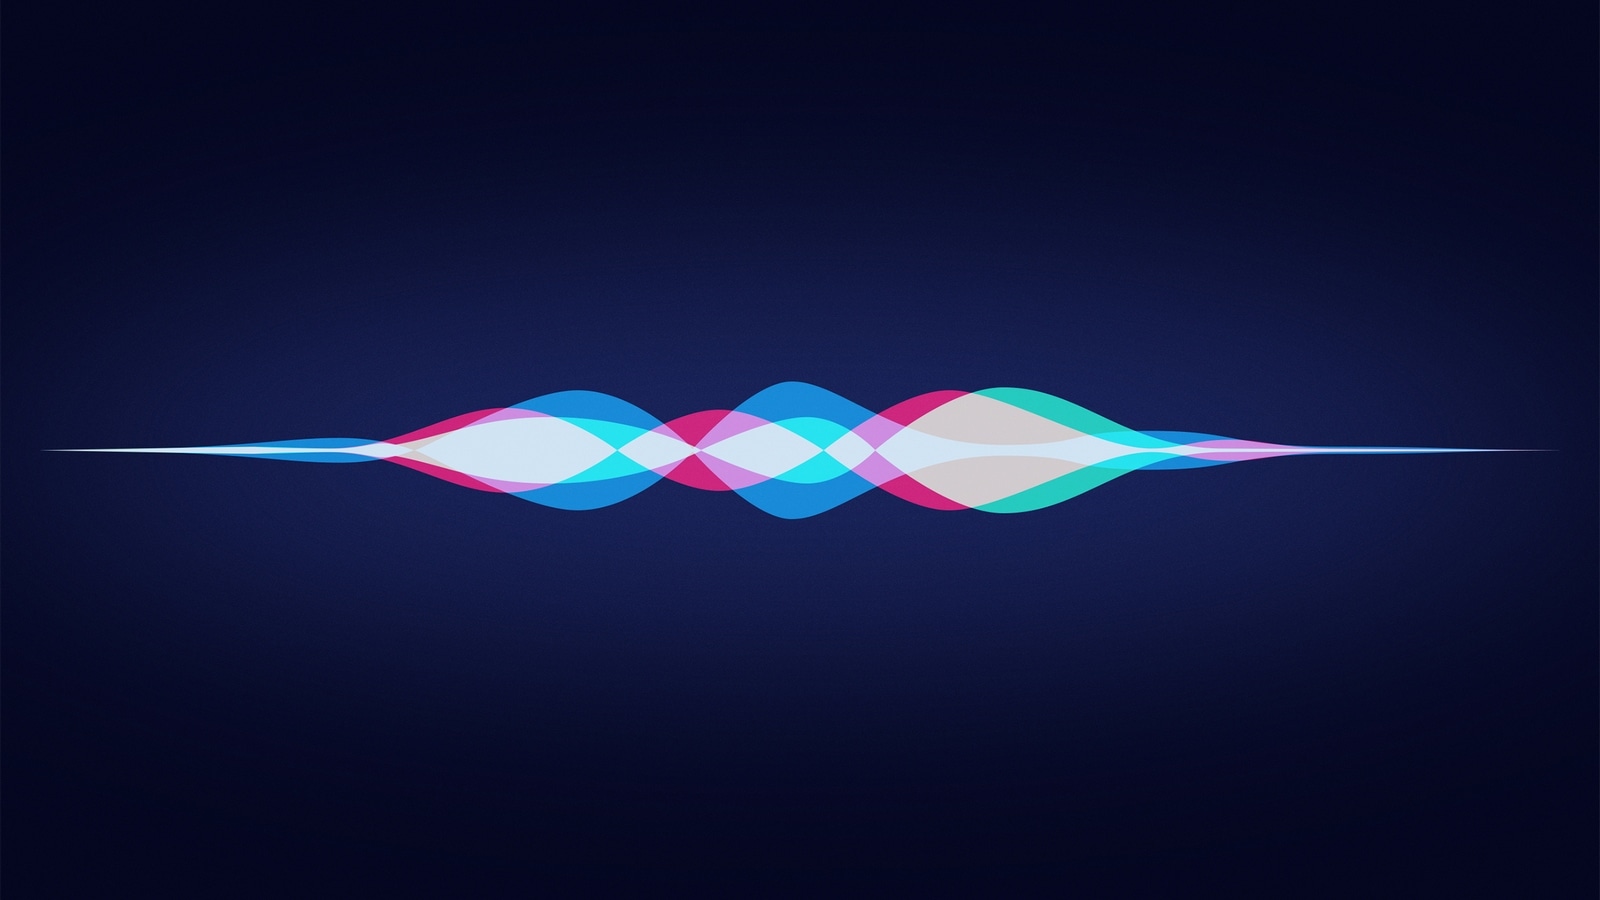 Apple may have hinted at Siri's arrival in Portugal